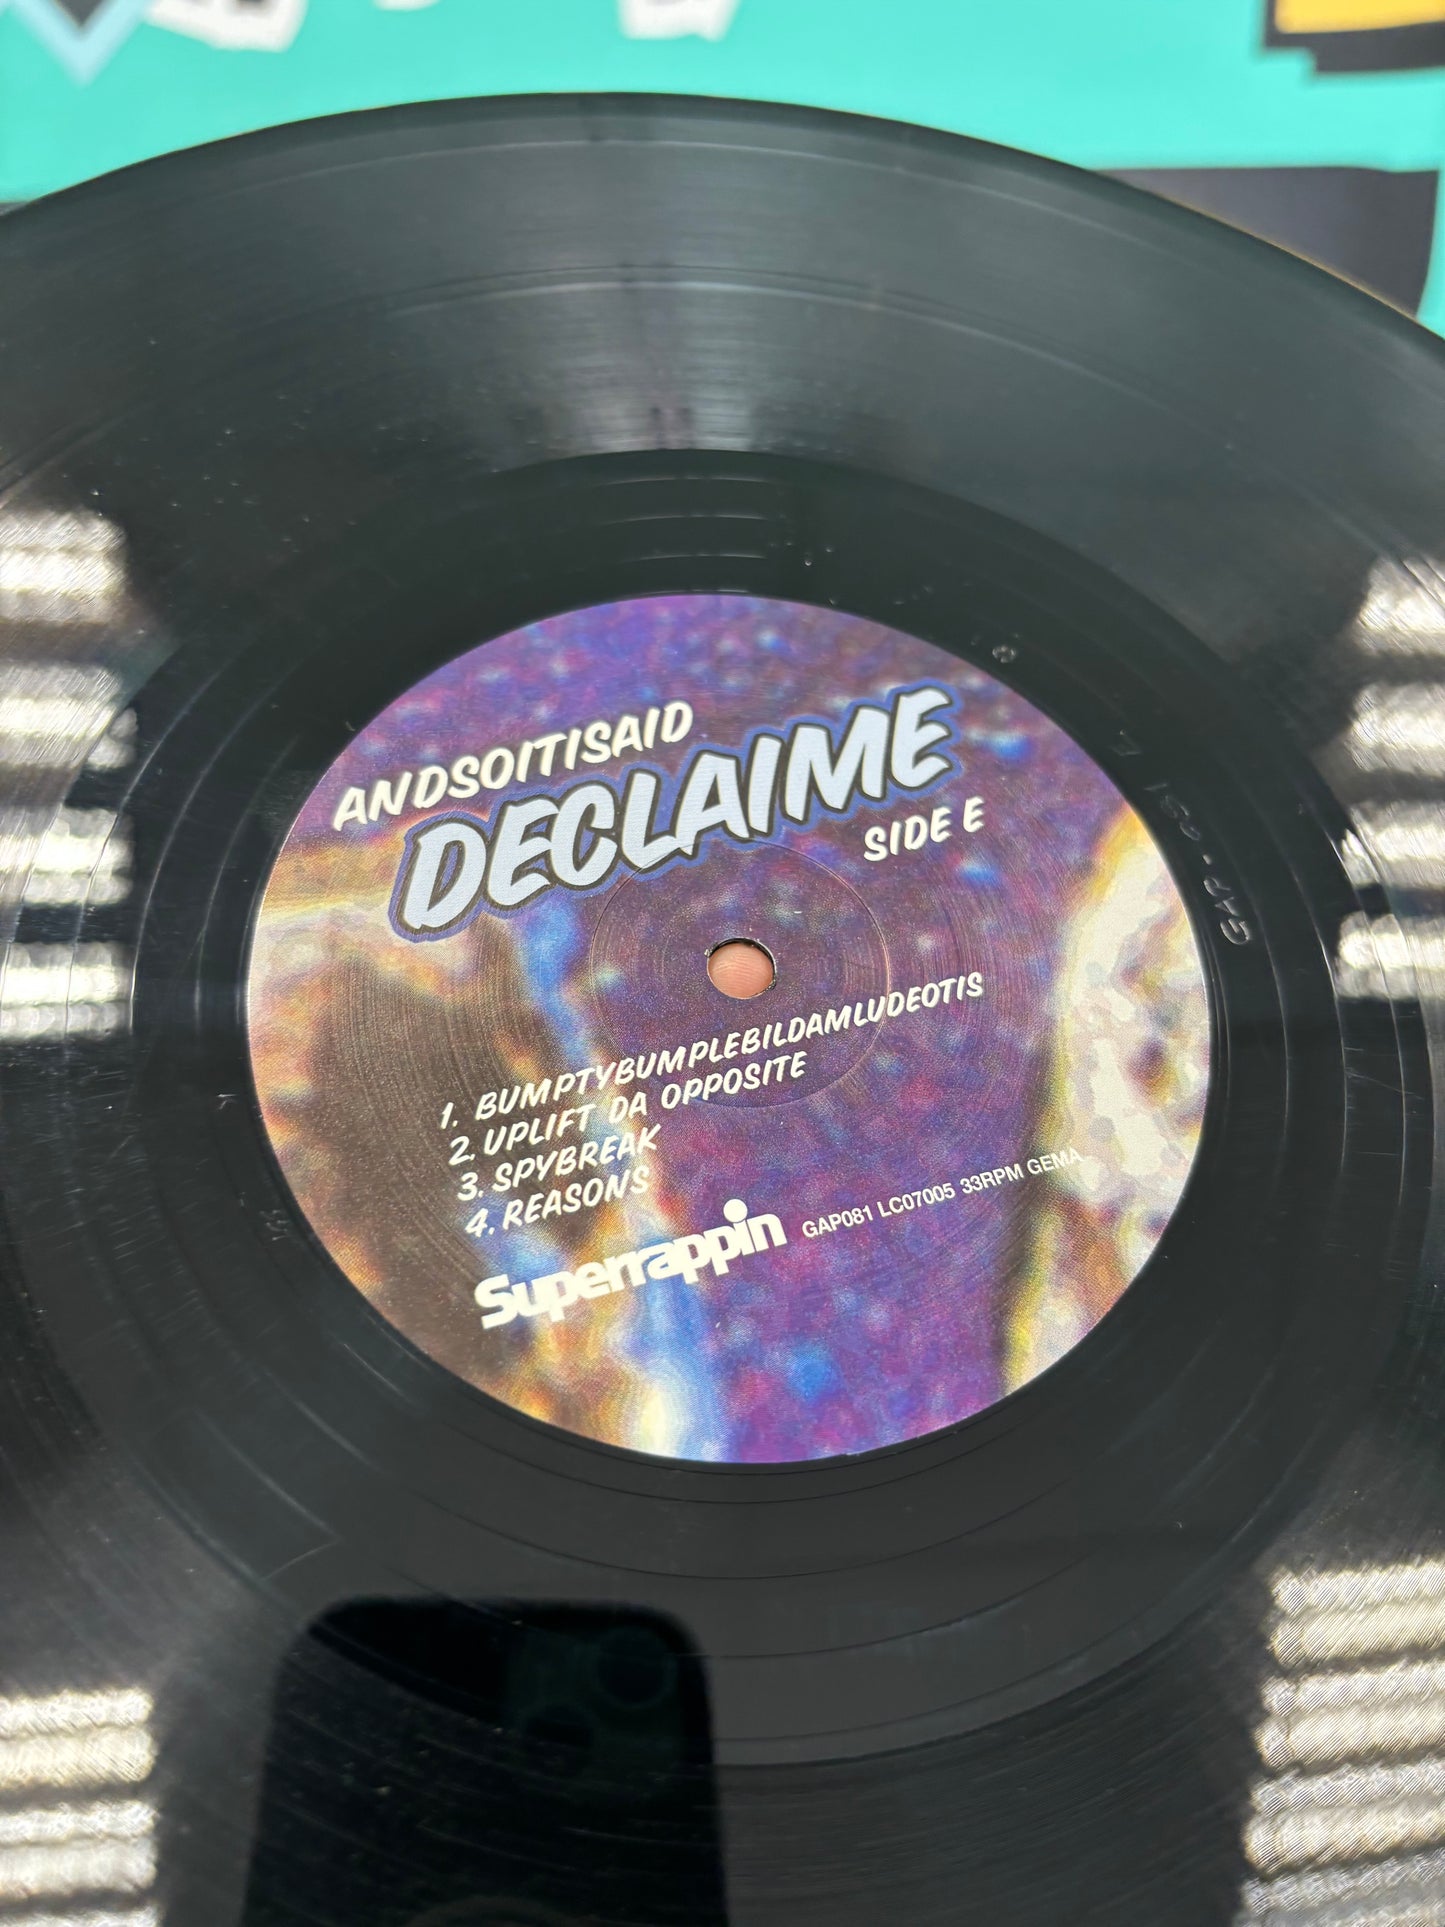 Declaime: Andsoitisaid(Come Take A Walk Through The Mind Of…), 3LP, gatefold, 1st pressing Europe, Groove Attack Productions, Superrappin, Germany 2001